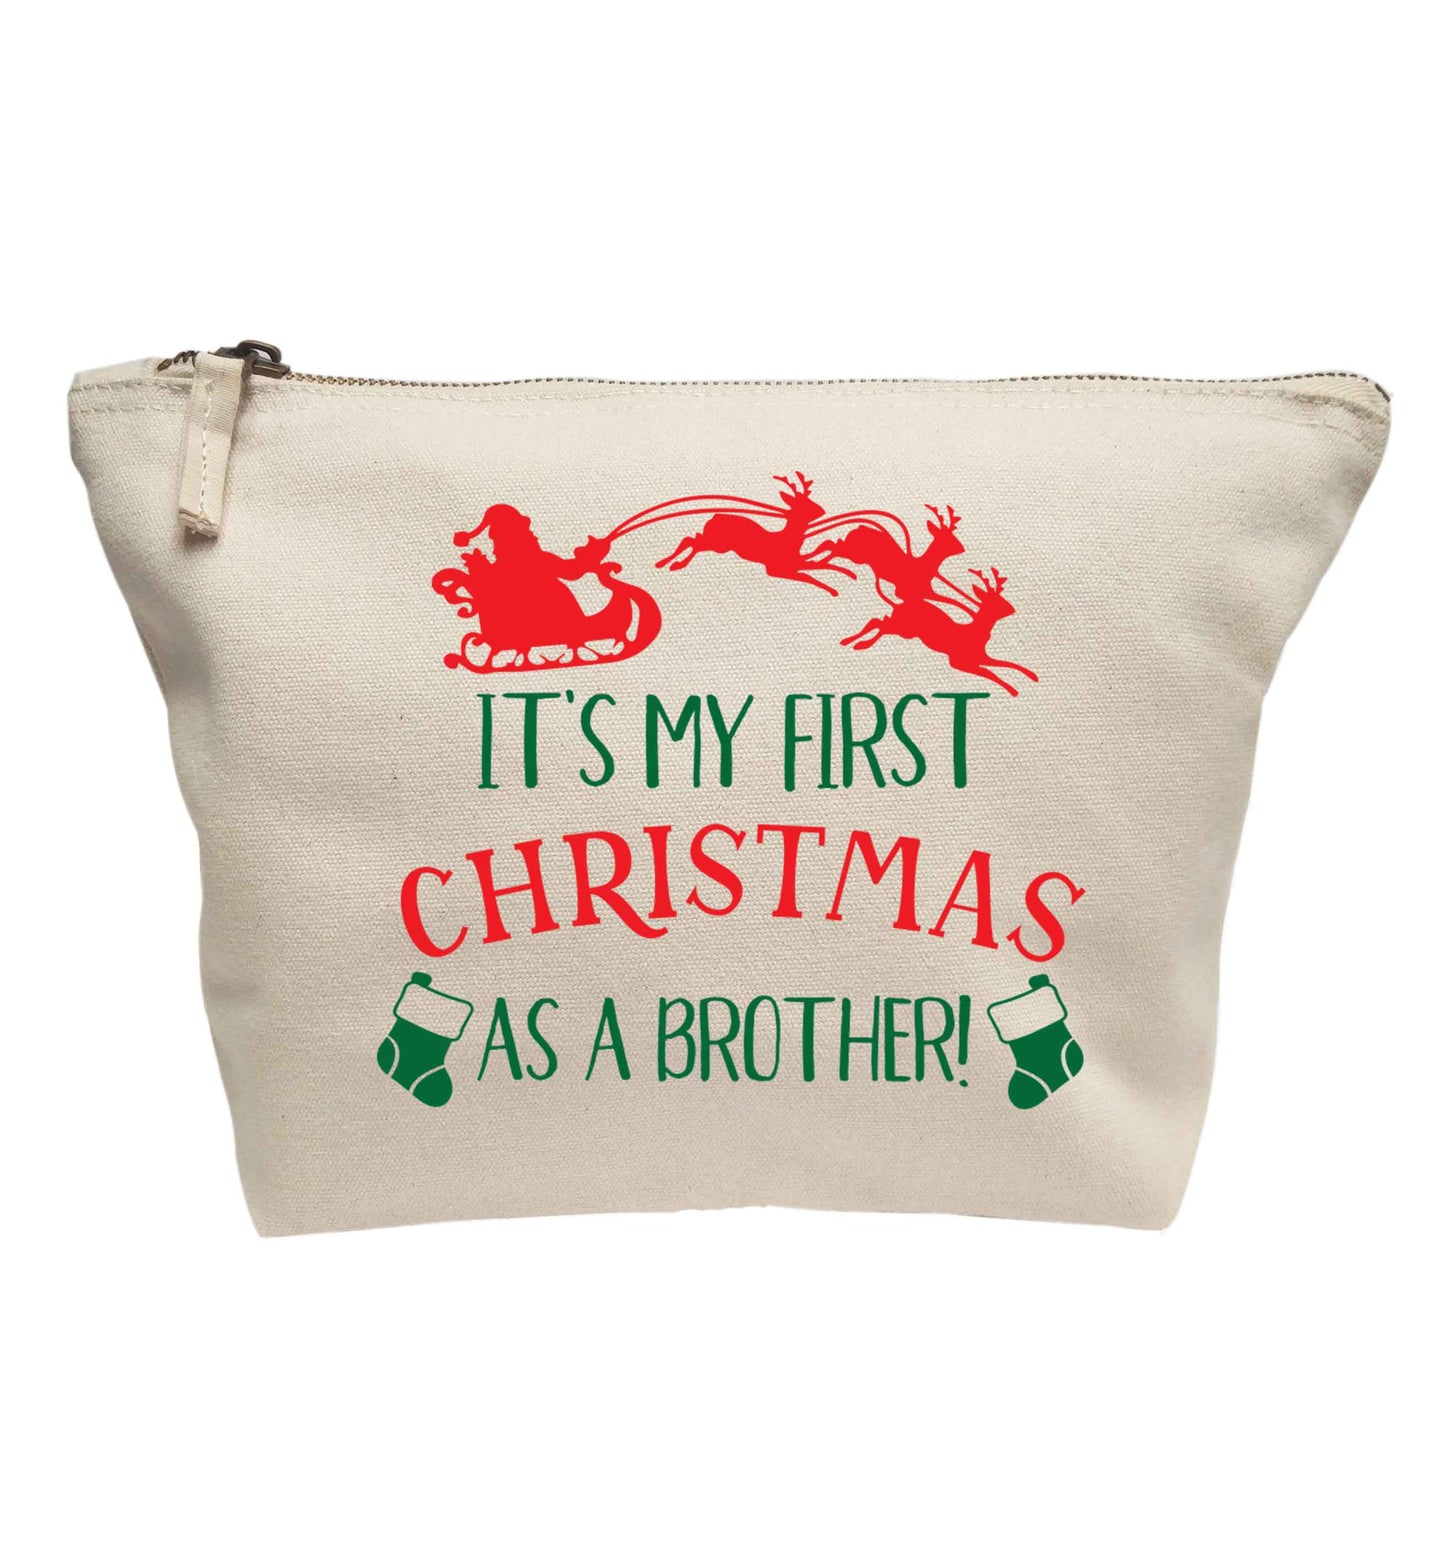 It's my first Christmas as a brother! | makeup / wash bag